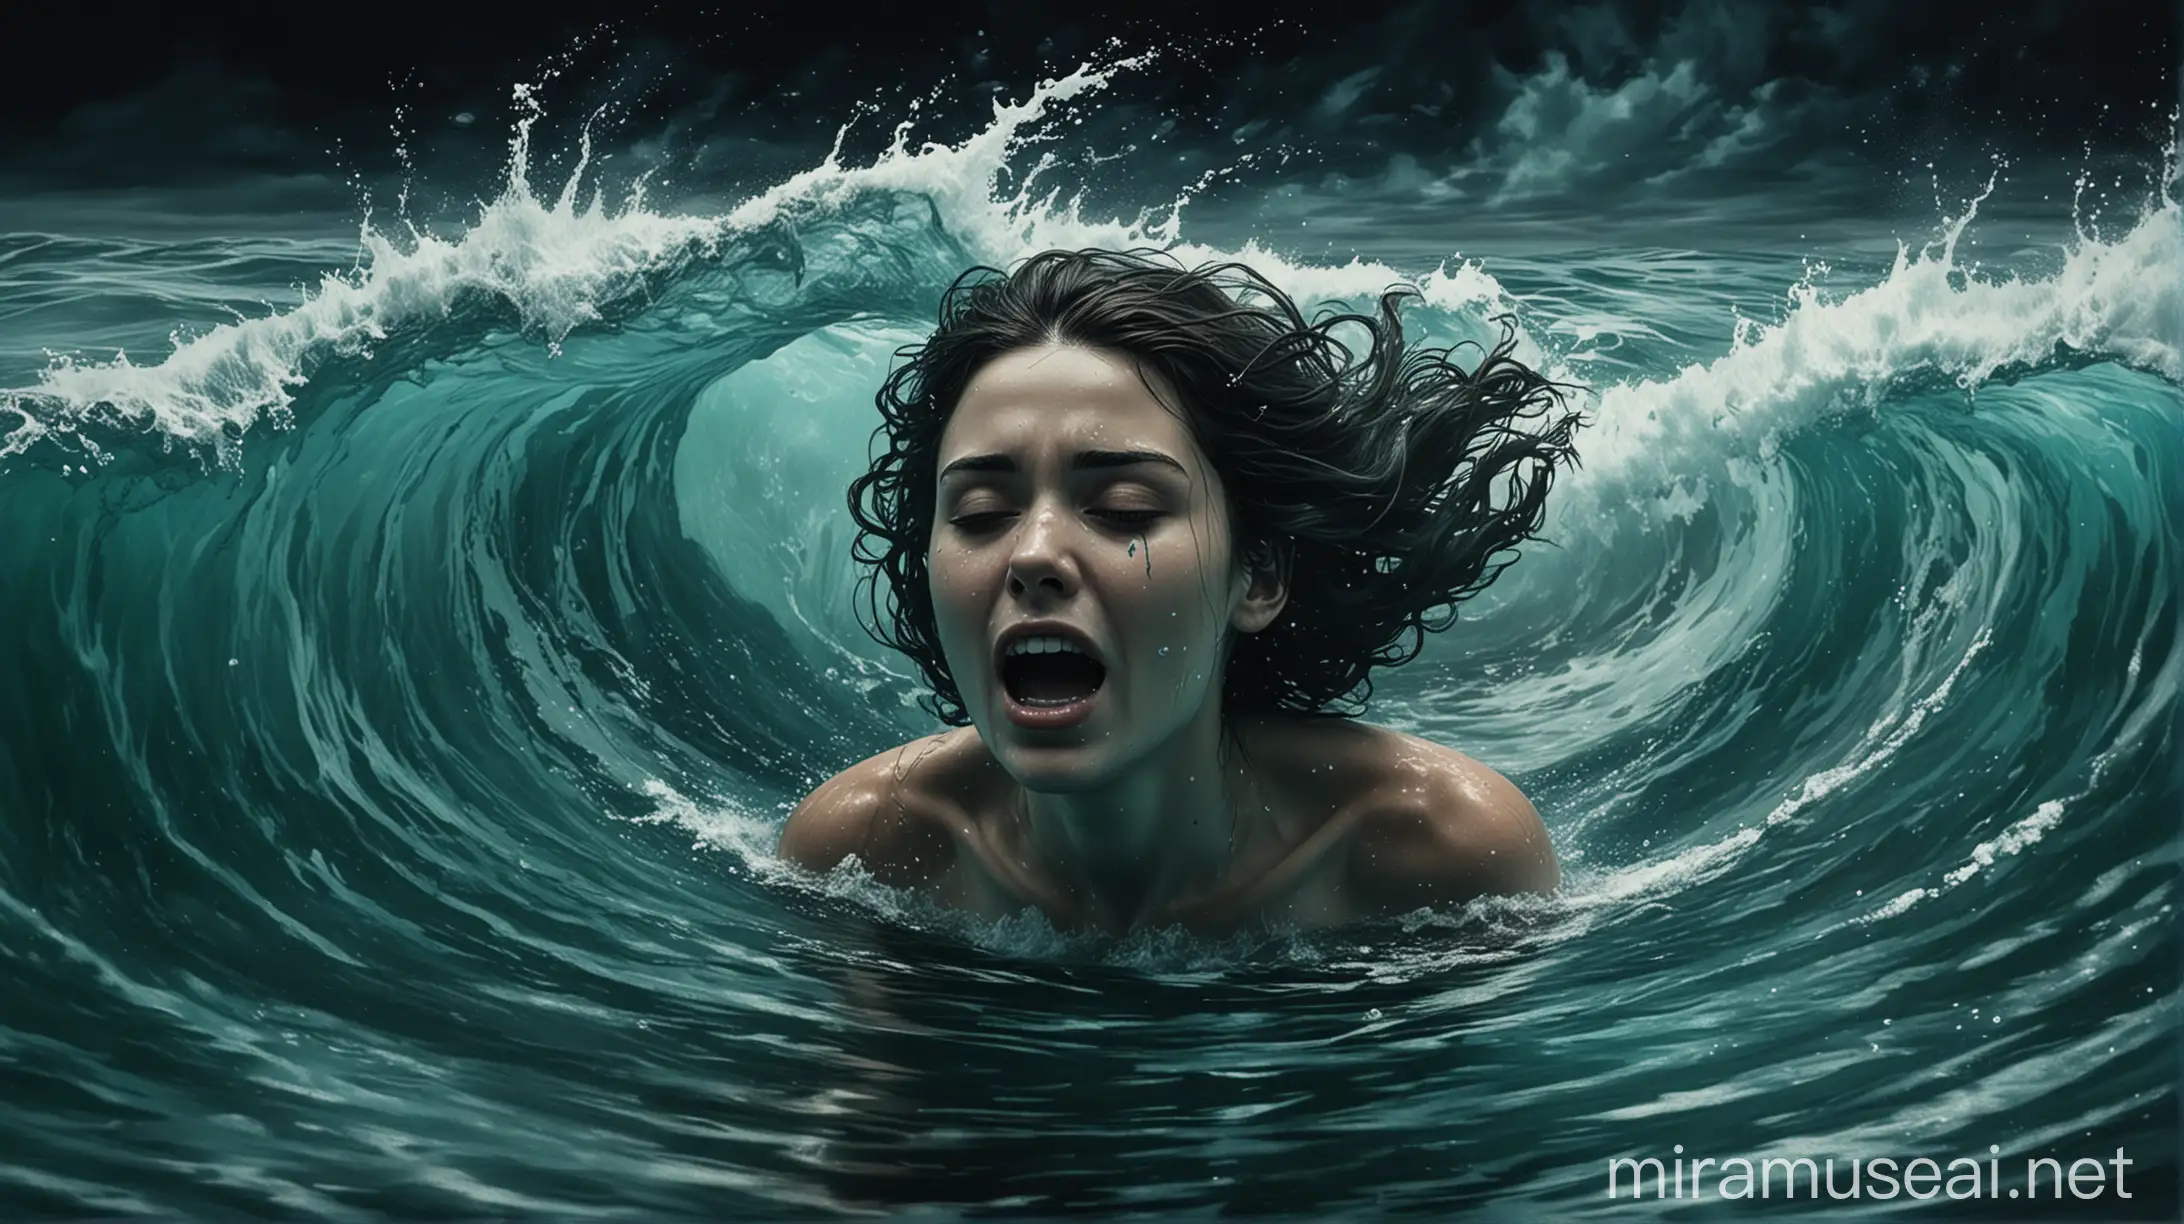 A woman sinking or swimming underwater, depicted in a swirling teal color that transitions to a dark blue or black at the bottom of the frame. The woman's expression should be one of despair and confusion, with tears streaming down her face Create a sense of depth in the water with gradients of teal and blue.  Intersperse shadowy figures throughout the background, representing secrets and deceptions Include crashing waves at the top of the frame to depict the emotional turmoil ,using a teal color that pops against the dark background visually representing the emotional depths, betrayal, and loss of love the woman is experiencing The teal color acts as a symbol of the overwhelming emotions 
